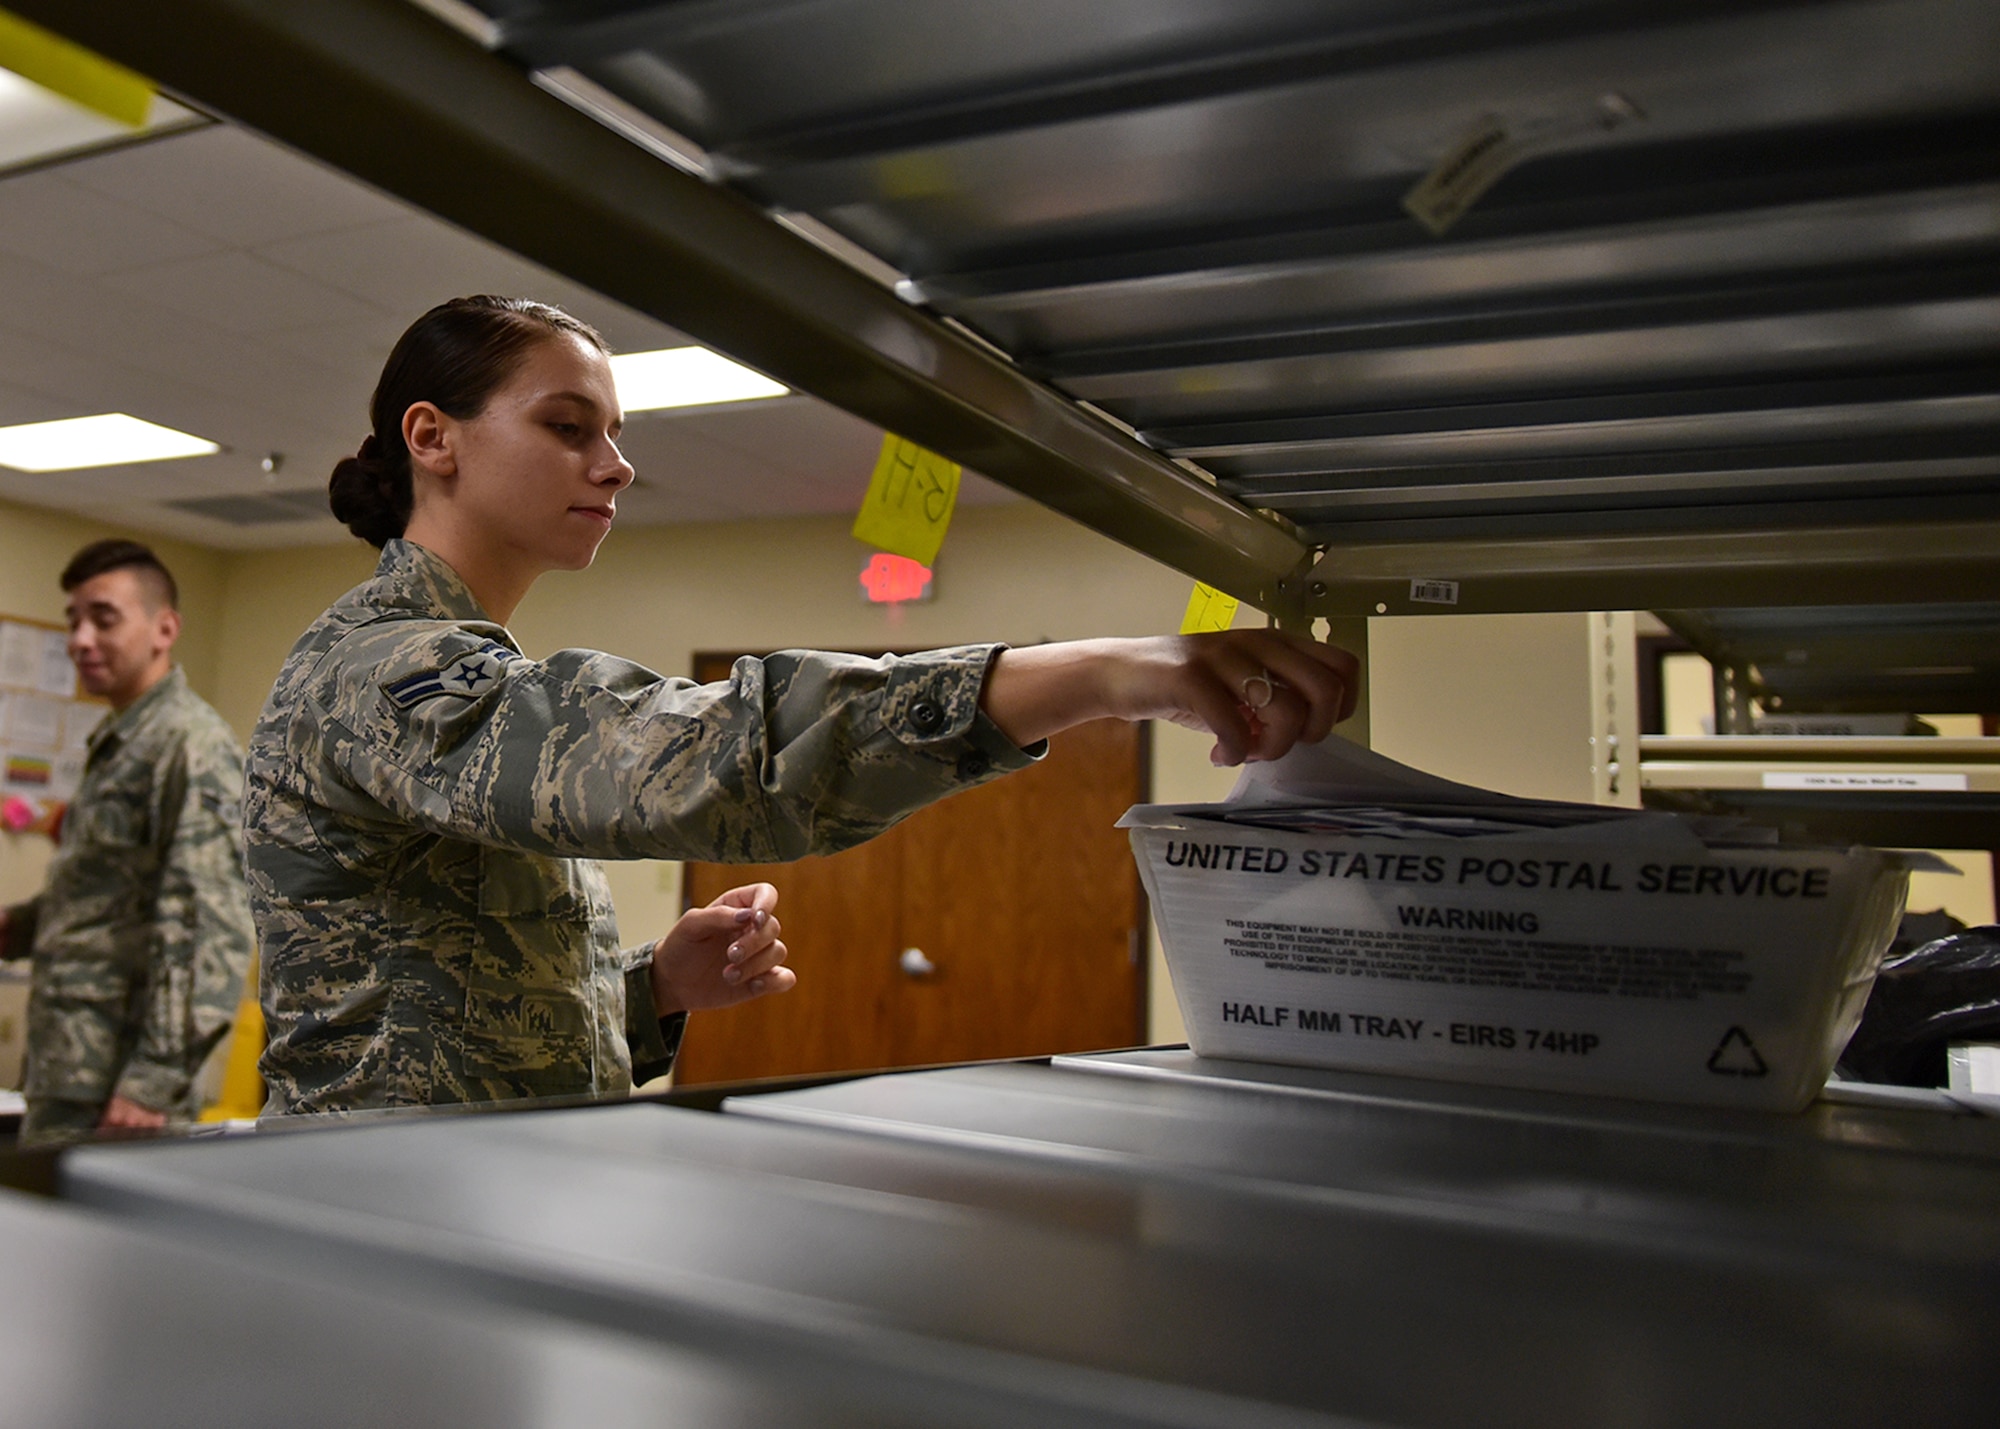 U.S. Air Force Airman 1st Class Isabella Opichka, 325th Force Support Squadron official mail technician, sorts official mail at Tyndall Air Force Base, Fla., Nov. 12, 2018. Opichka and fellow technicians returned two weeks after Hurricane Michael struck Tyndall and have been working to restore mail delivery across the installation. (U.S. Air Force photo by Senior Airman Isaiah J. Soliz)